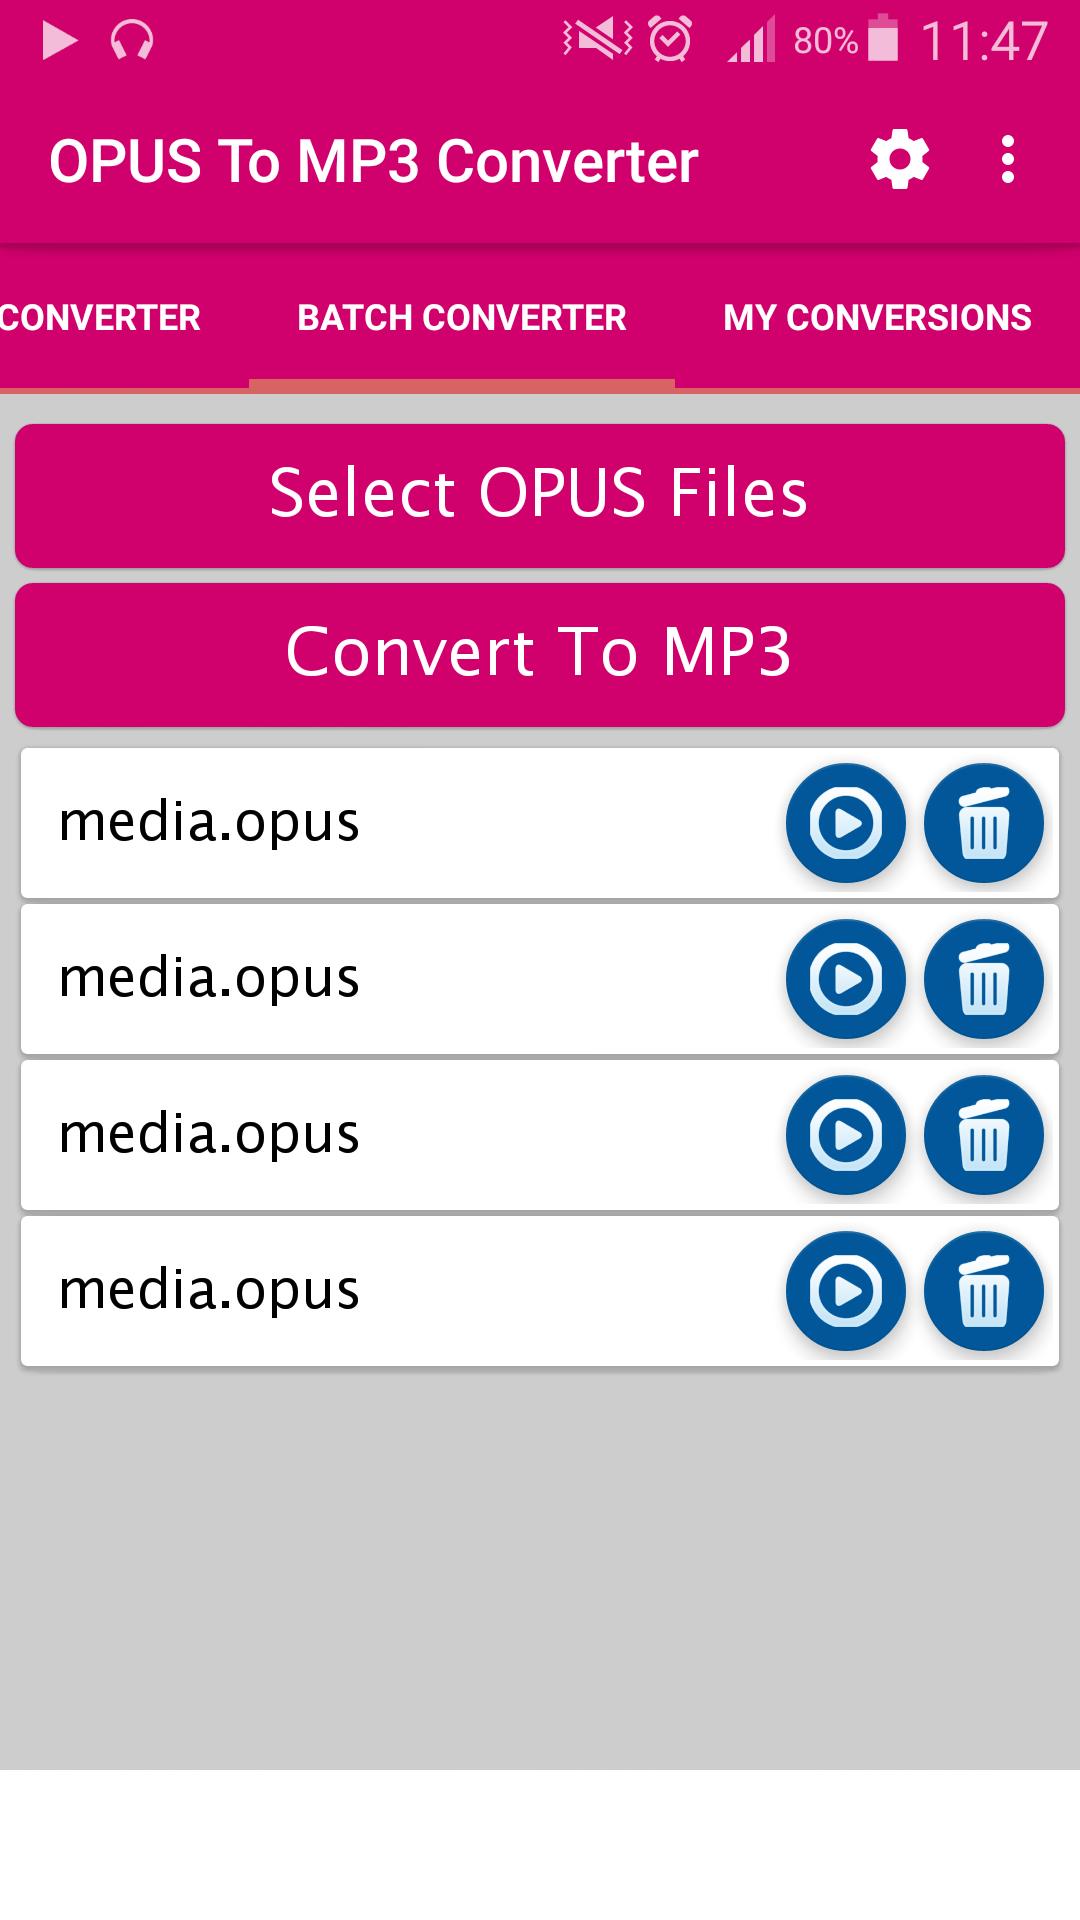 Super Converter : OPUS To MP3 for Android - APK Download